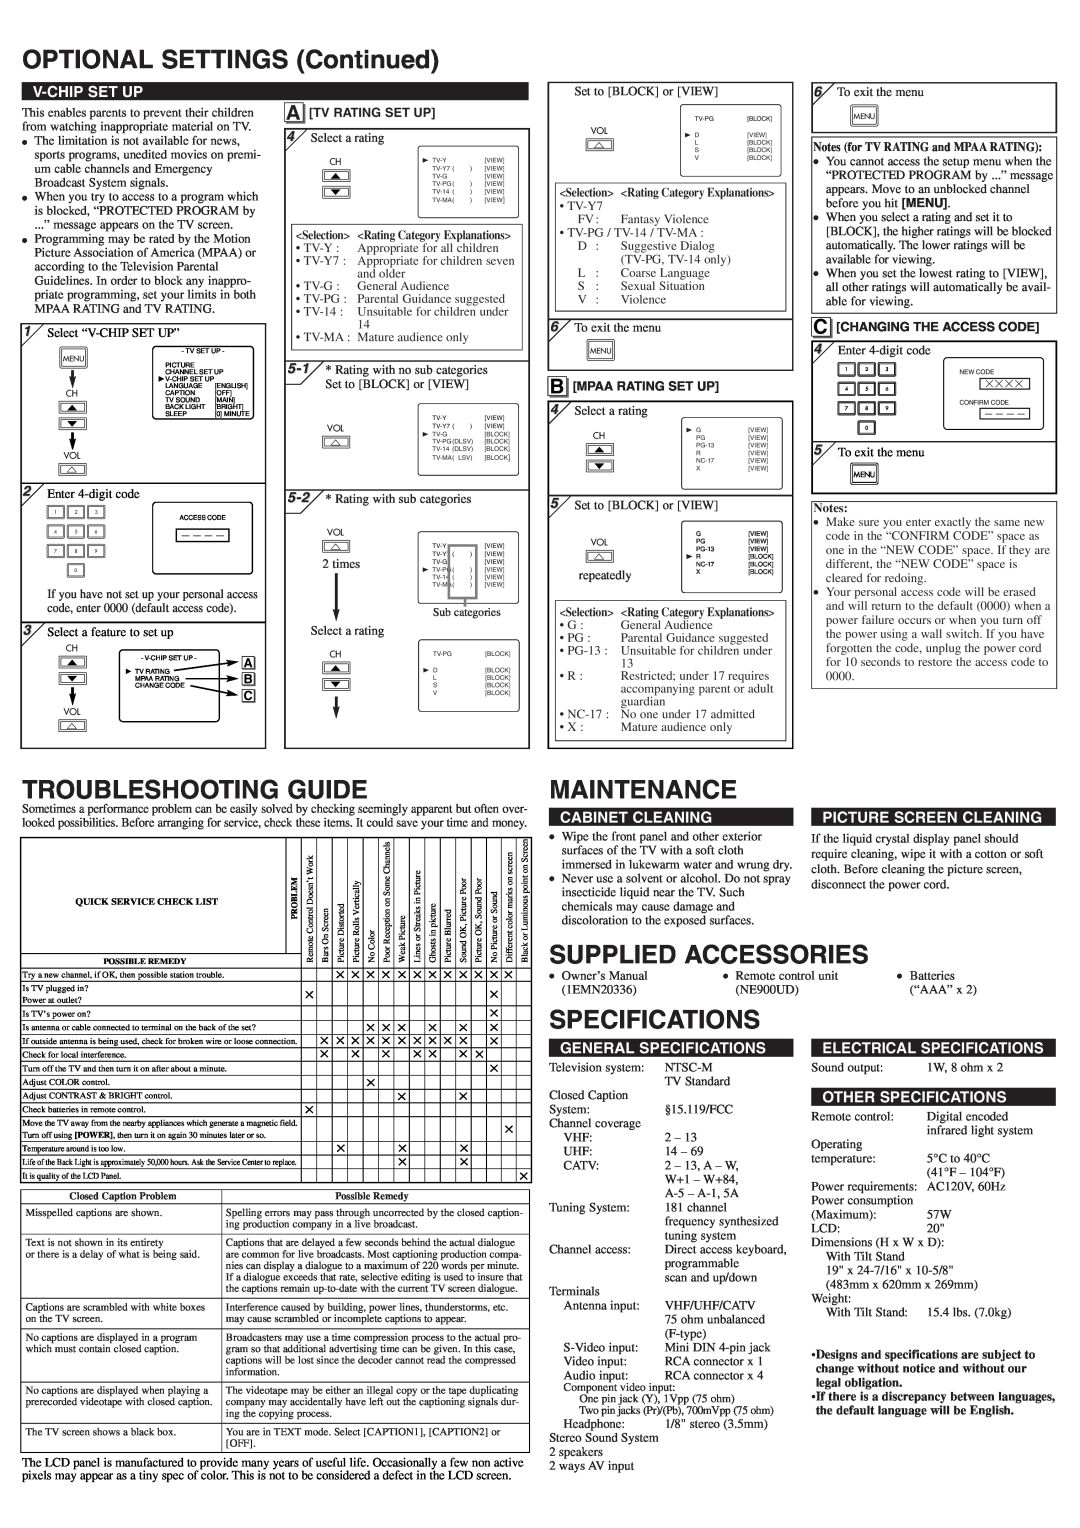 Sylvania 6620LF4 OPTIONAL SETTINGS Continued, Troubleshooting Guide, Maintenance, Specifications, V-Chip Set Up 